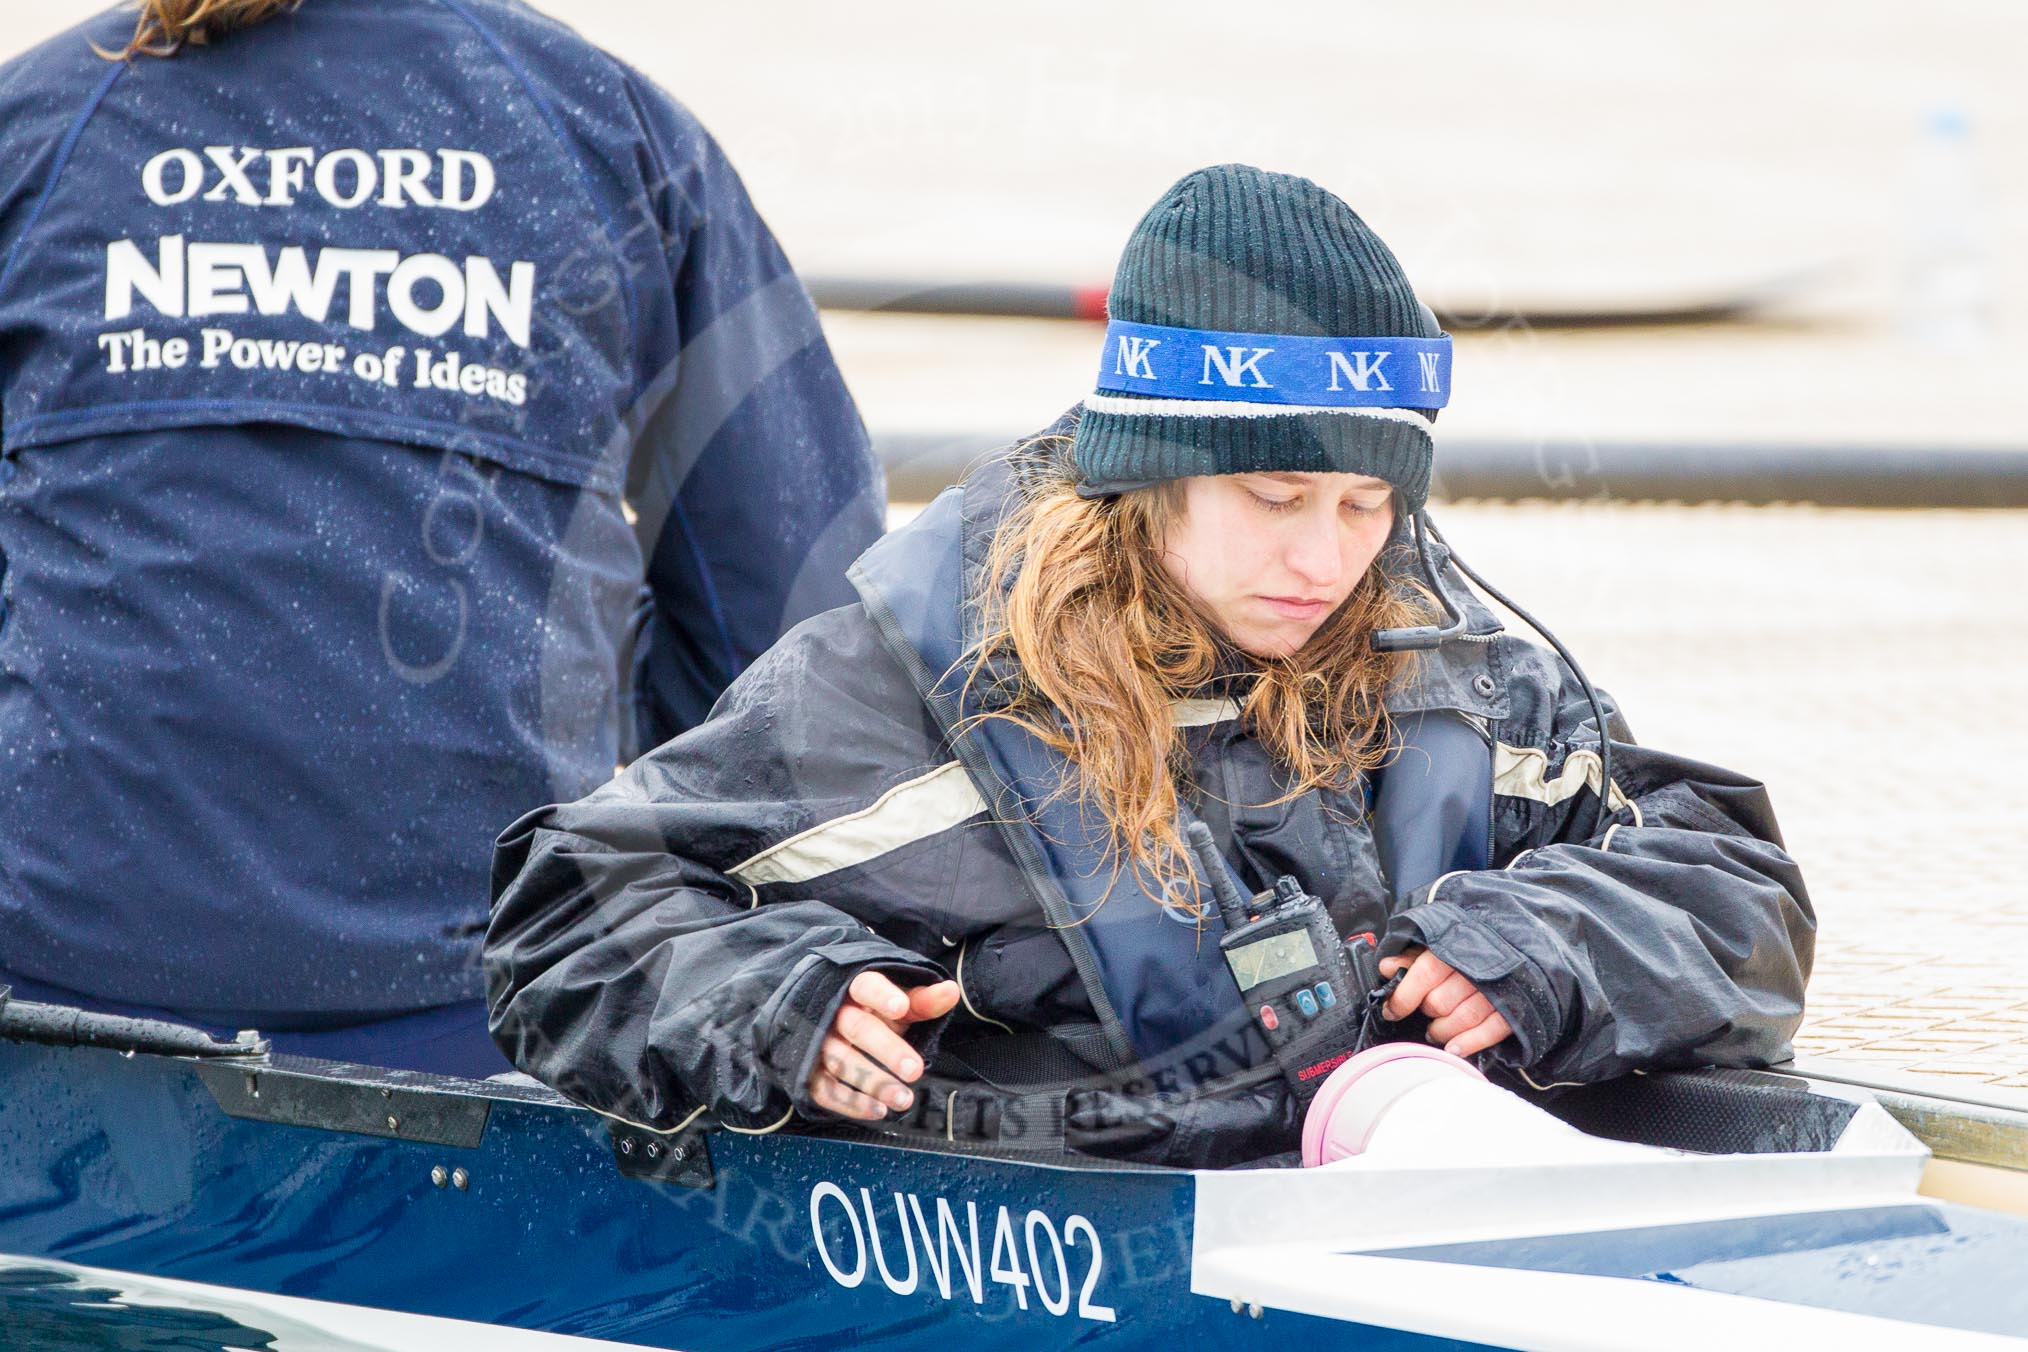 The Boat Race season 2013 - fixture OUWBC vs Molesey BC: OUWBC's cox Sonya Milanova getting into a coxed four at Dorney Lake..
Dorney Lake,
Dorney, Windsor,
Berkshire,
United Kingdom,
on 24 February 2013 at 10:55, image #12